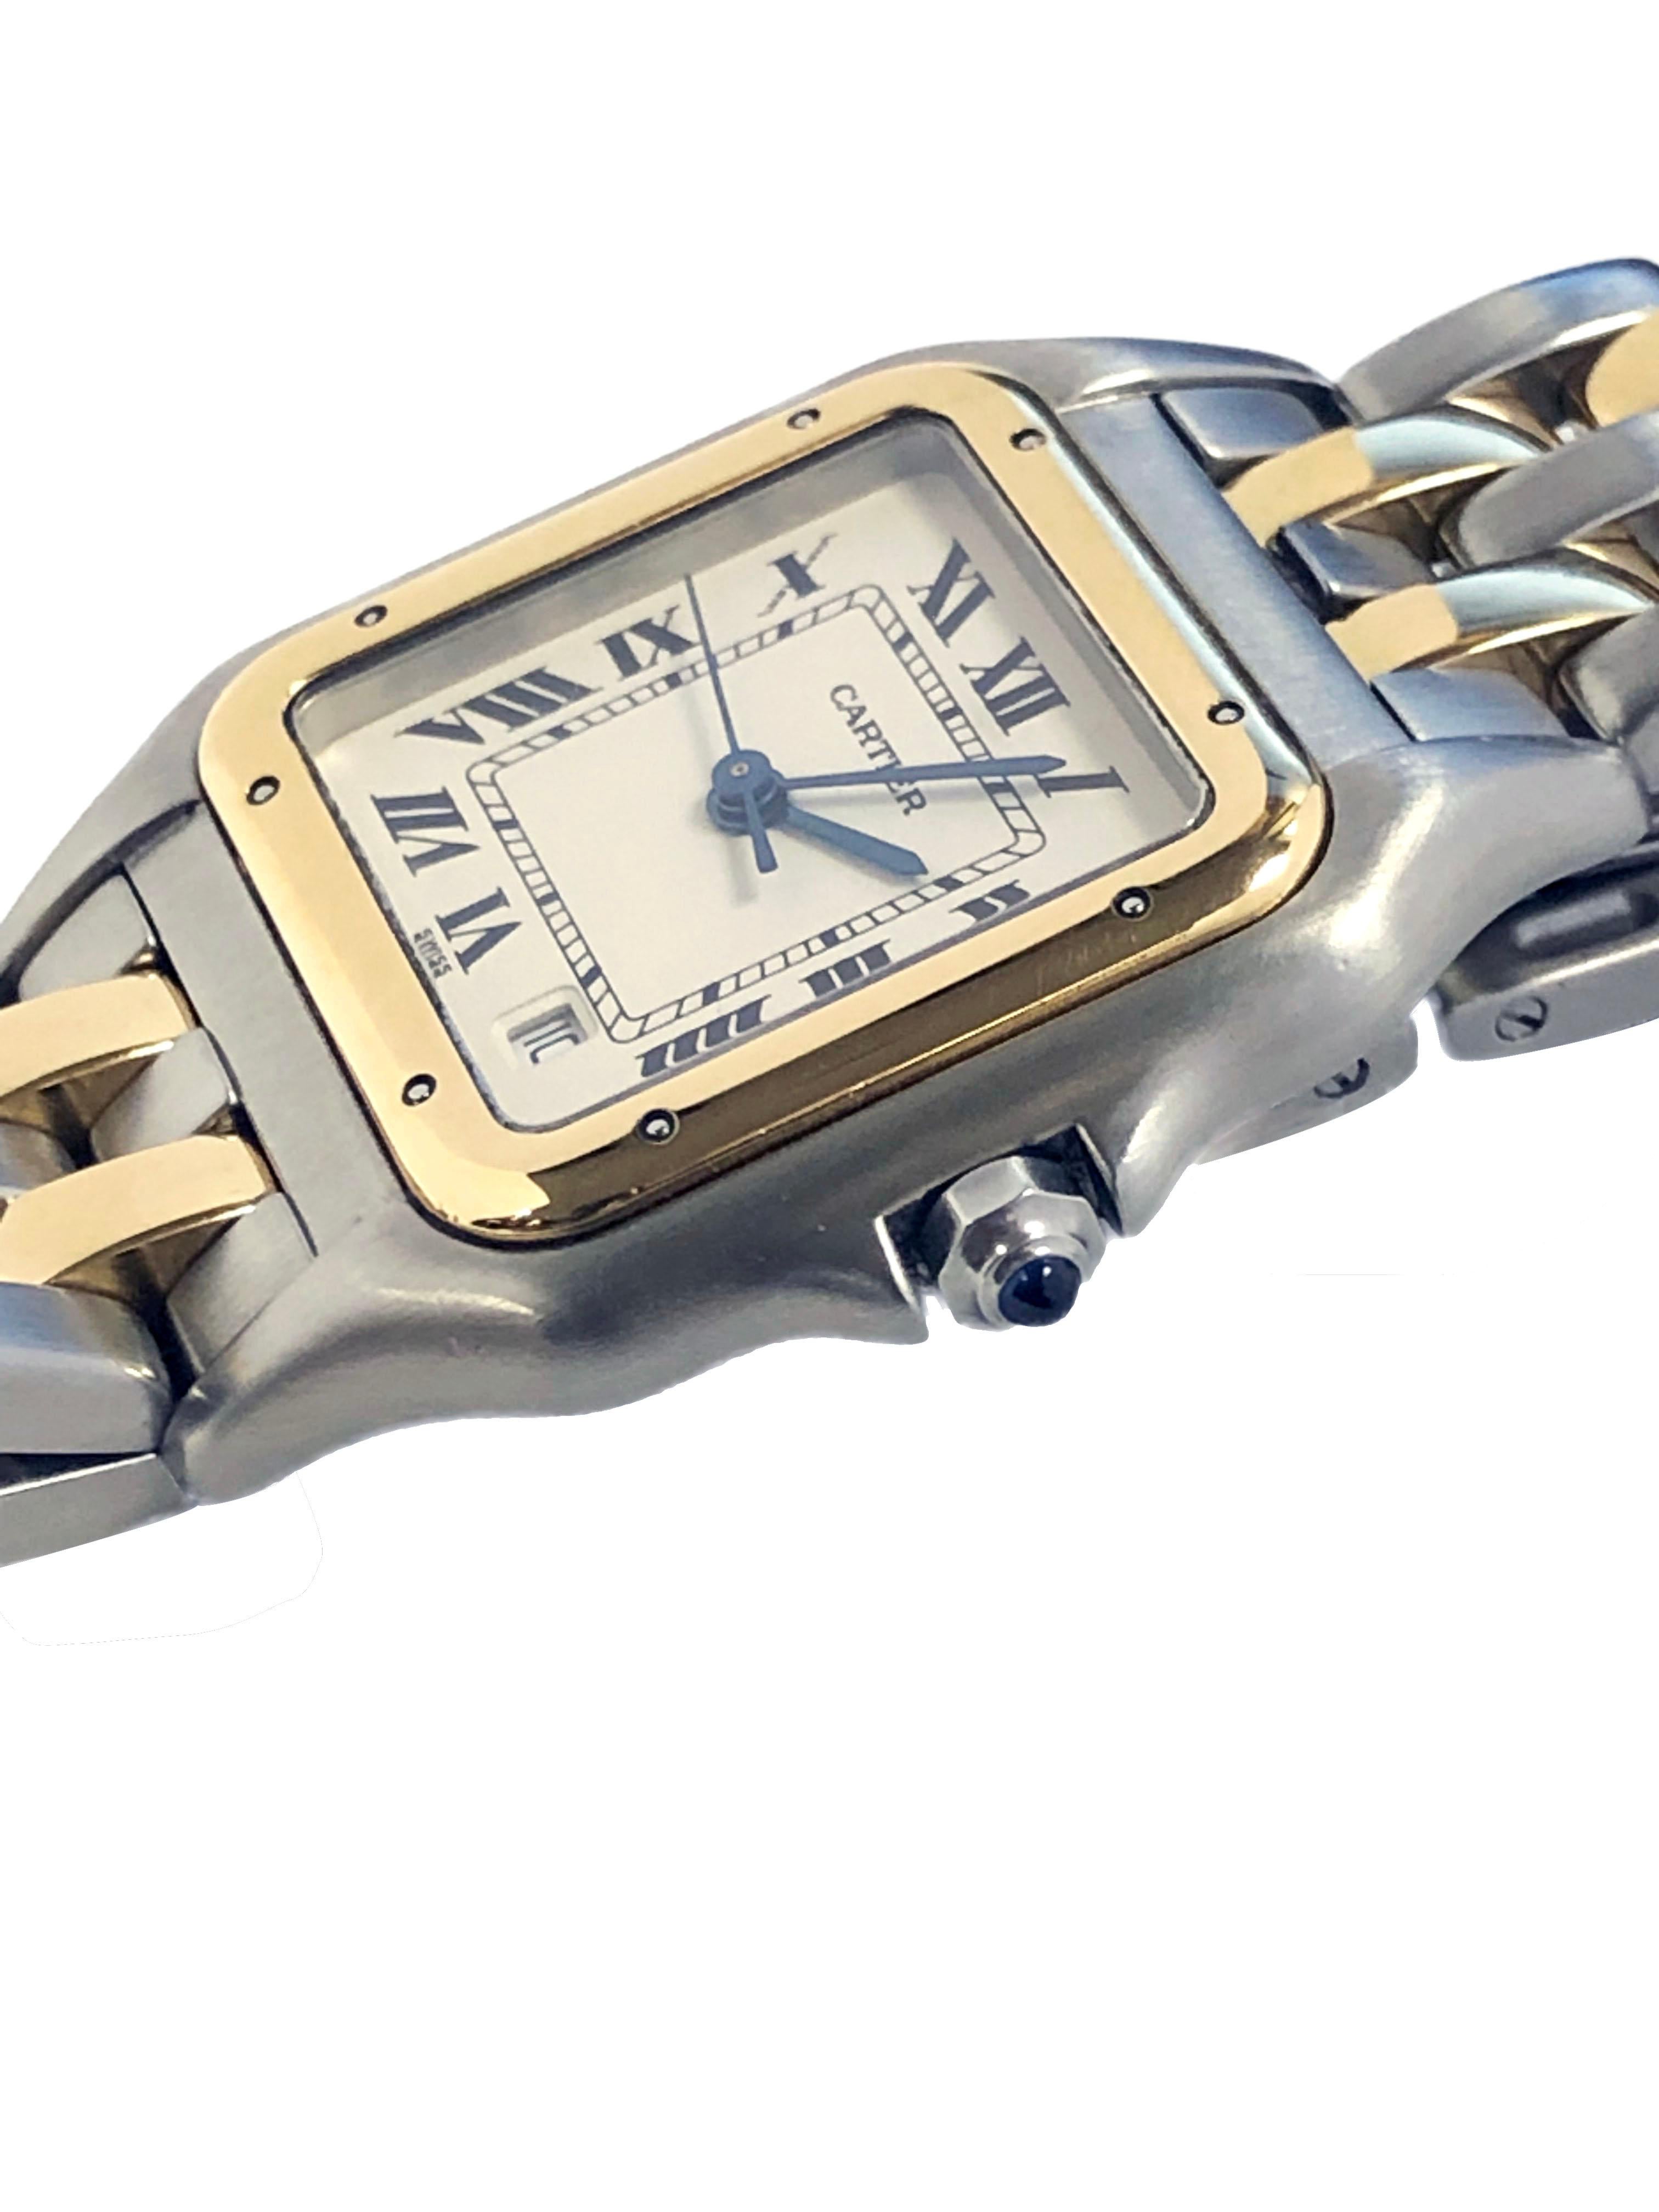 Circa 2000 Cartier Panther Collection Wrist Watch, 27 X 26 M.M. Stainless Steel 2 Piece Water Resistant Case with 18K Yellow Gold Bezel, Quartz Movement, White Dial with Black Roman Numerals, Sweep seconds hand and a Calendar window at the 5